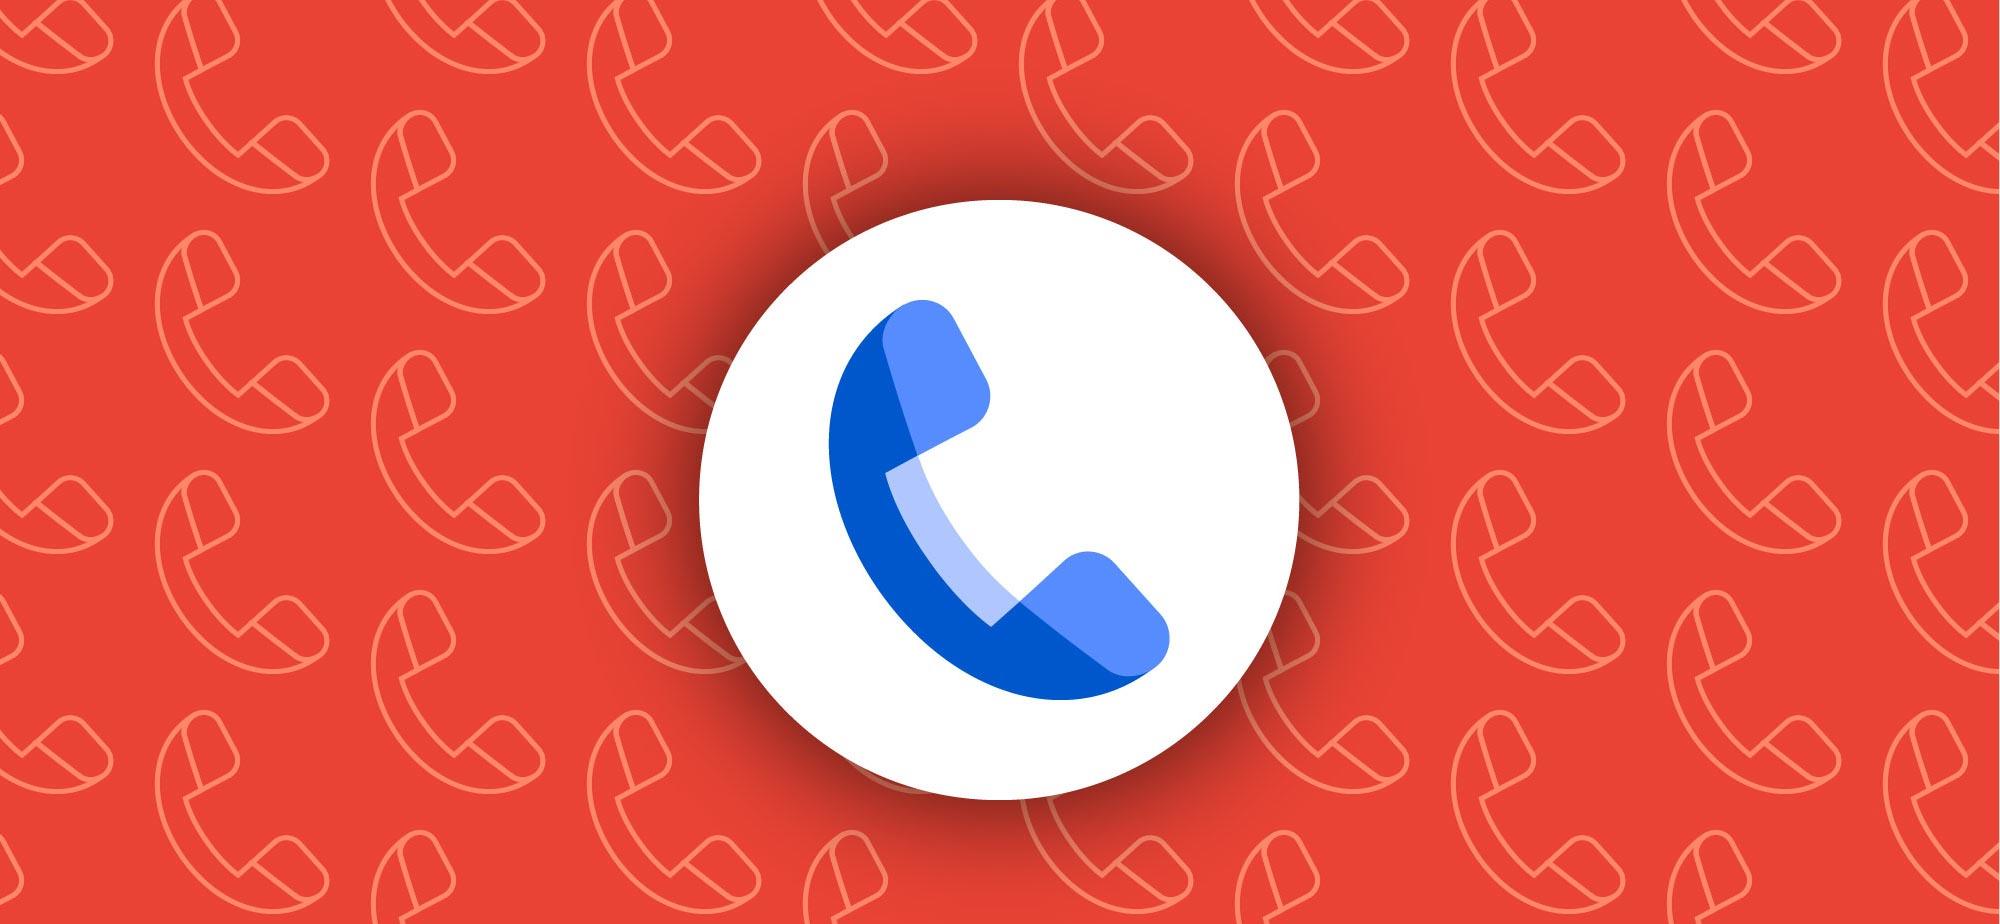 Google Phone App Removes Nearby Places Search: Enhancing Phone Calling Experience